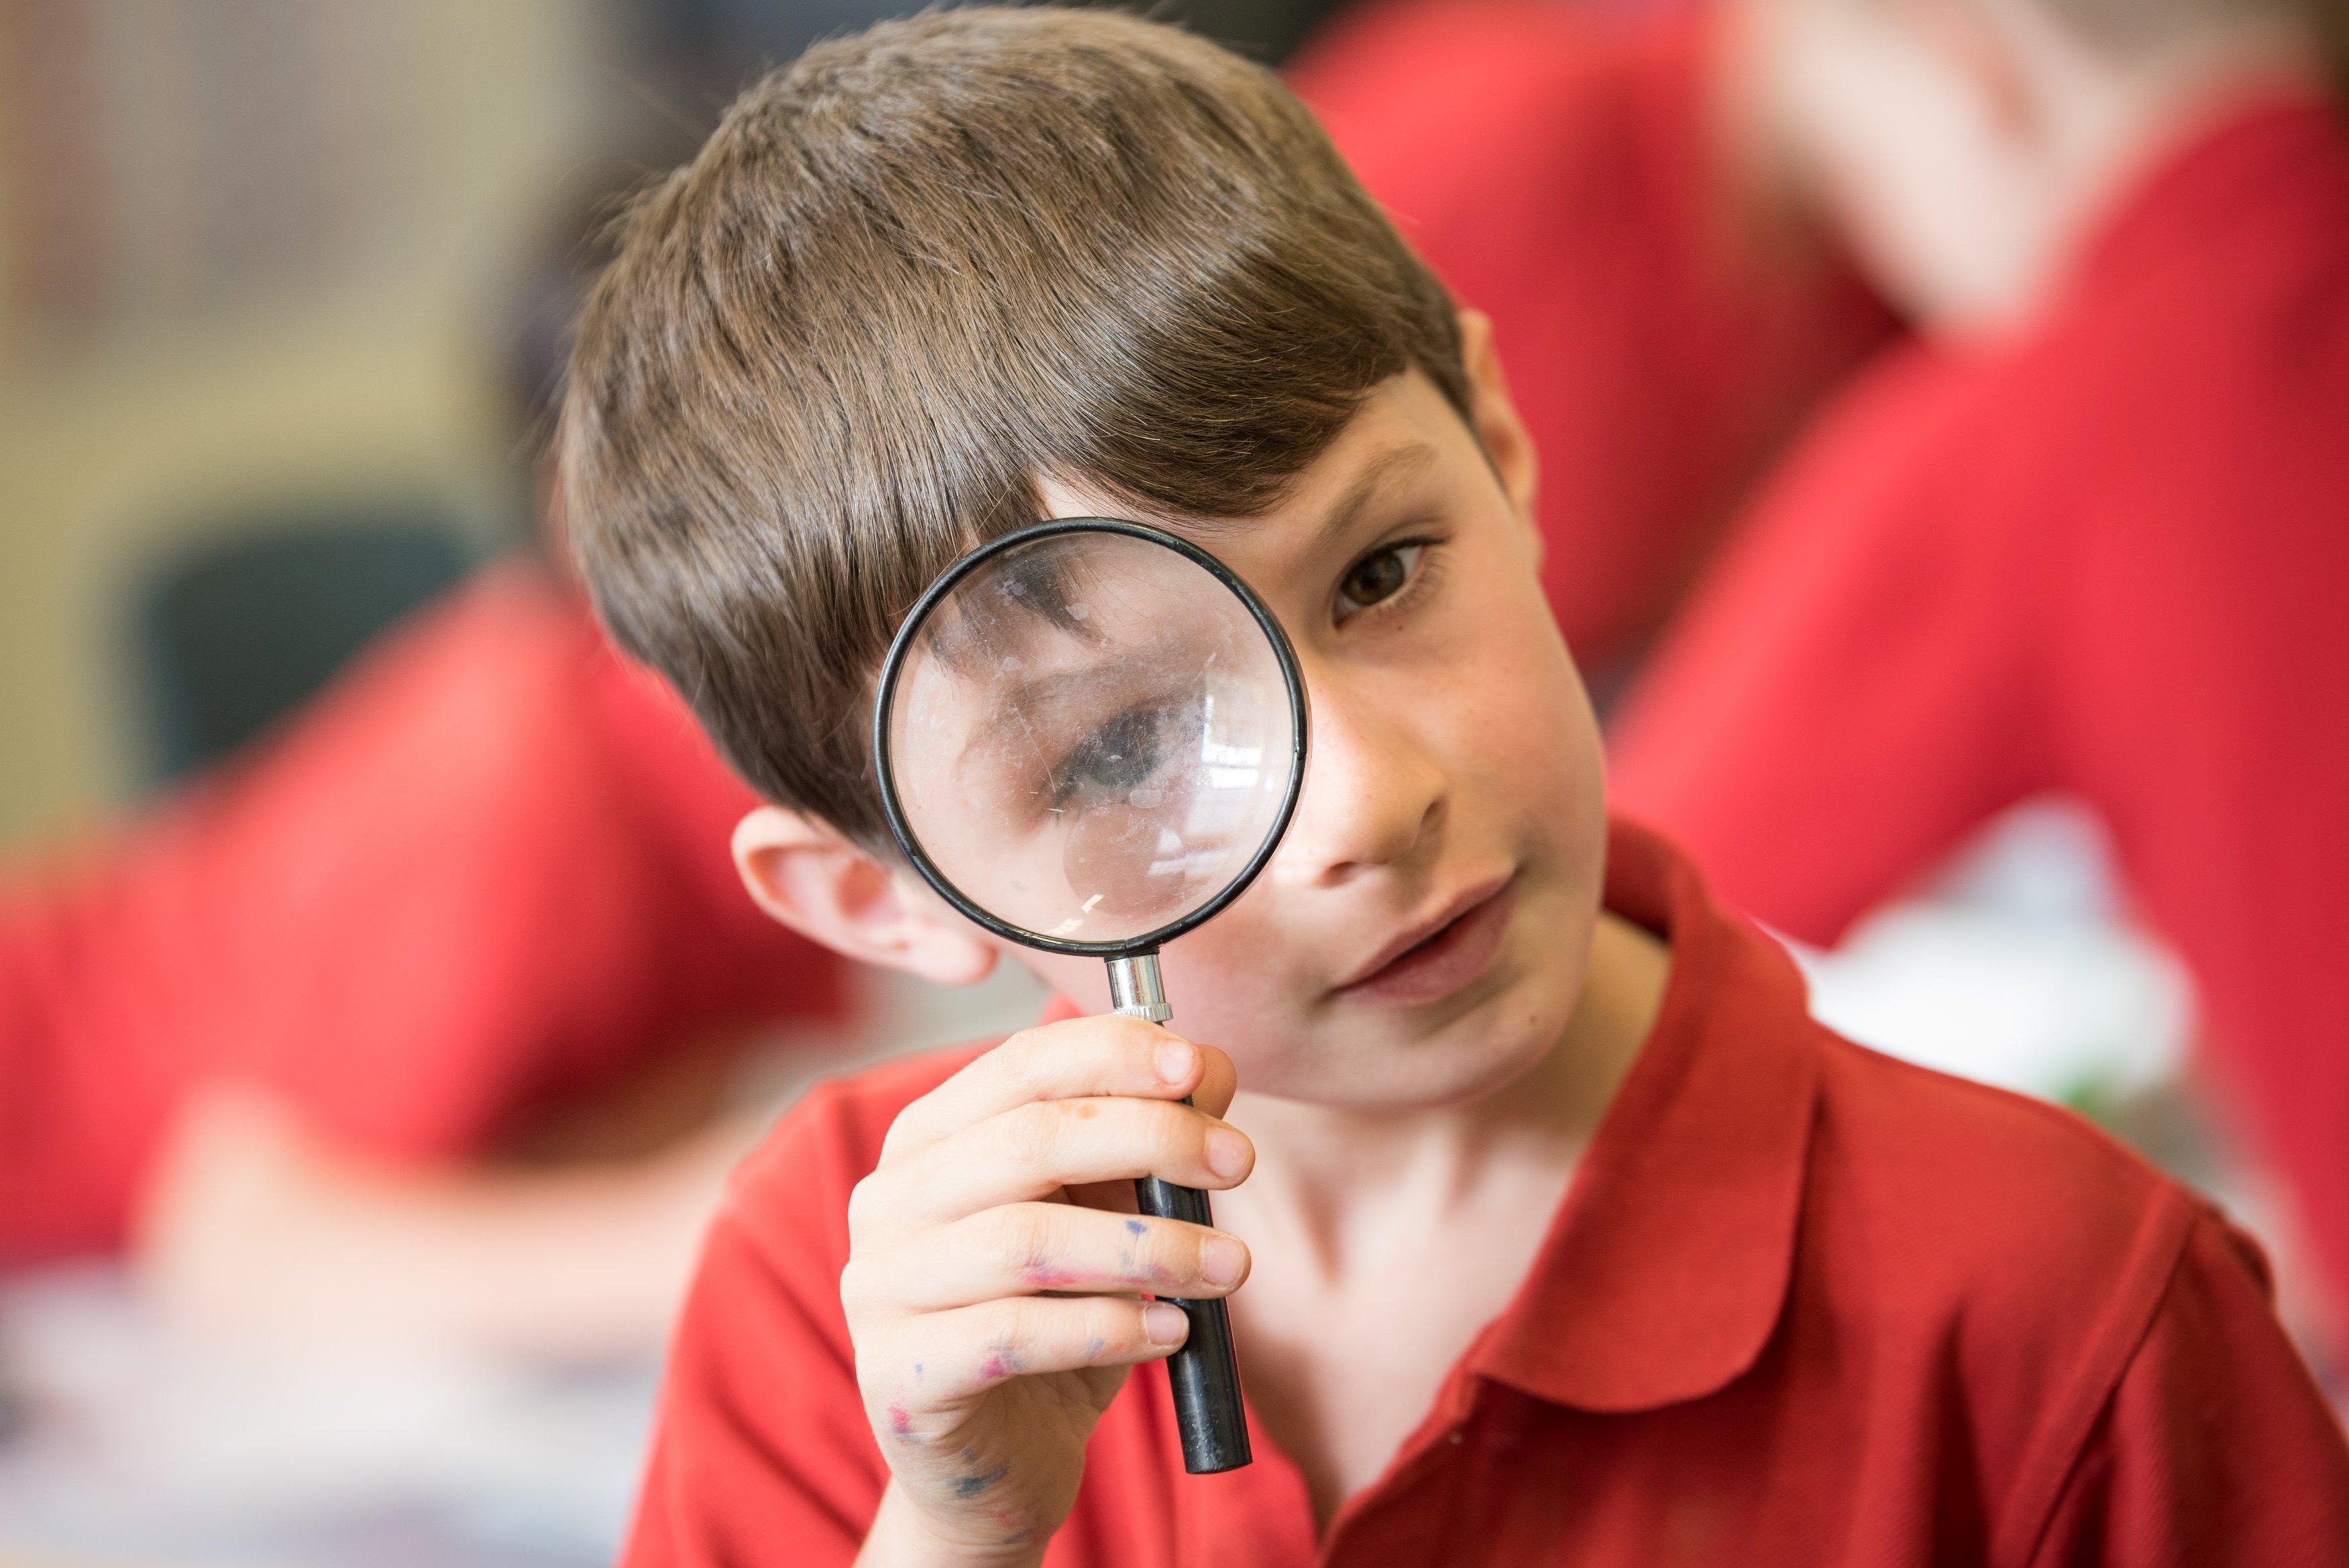 Primary school aged boy wearing a red shirt holding a magnifying glass close to his right eye.